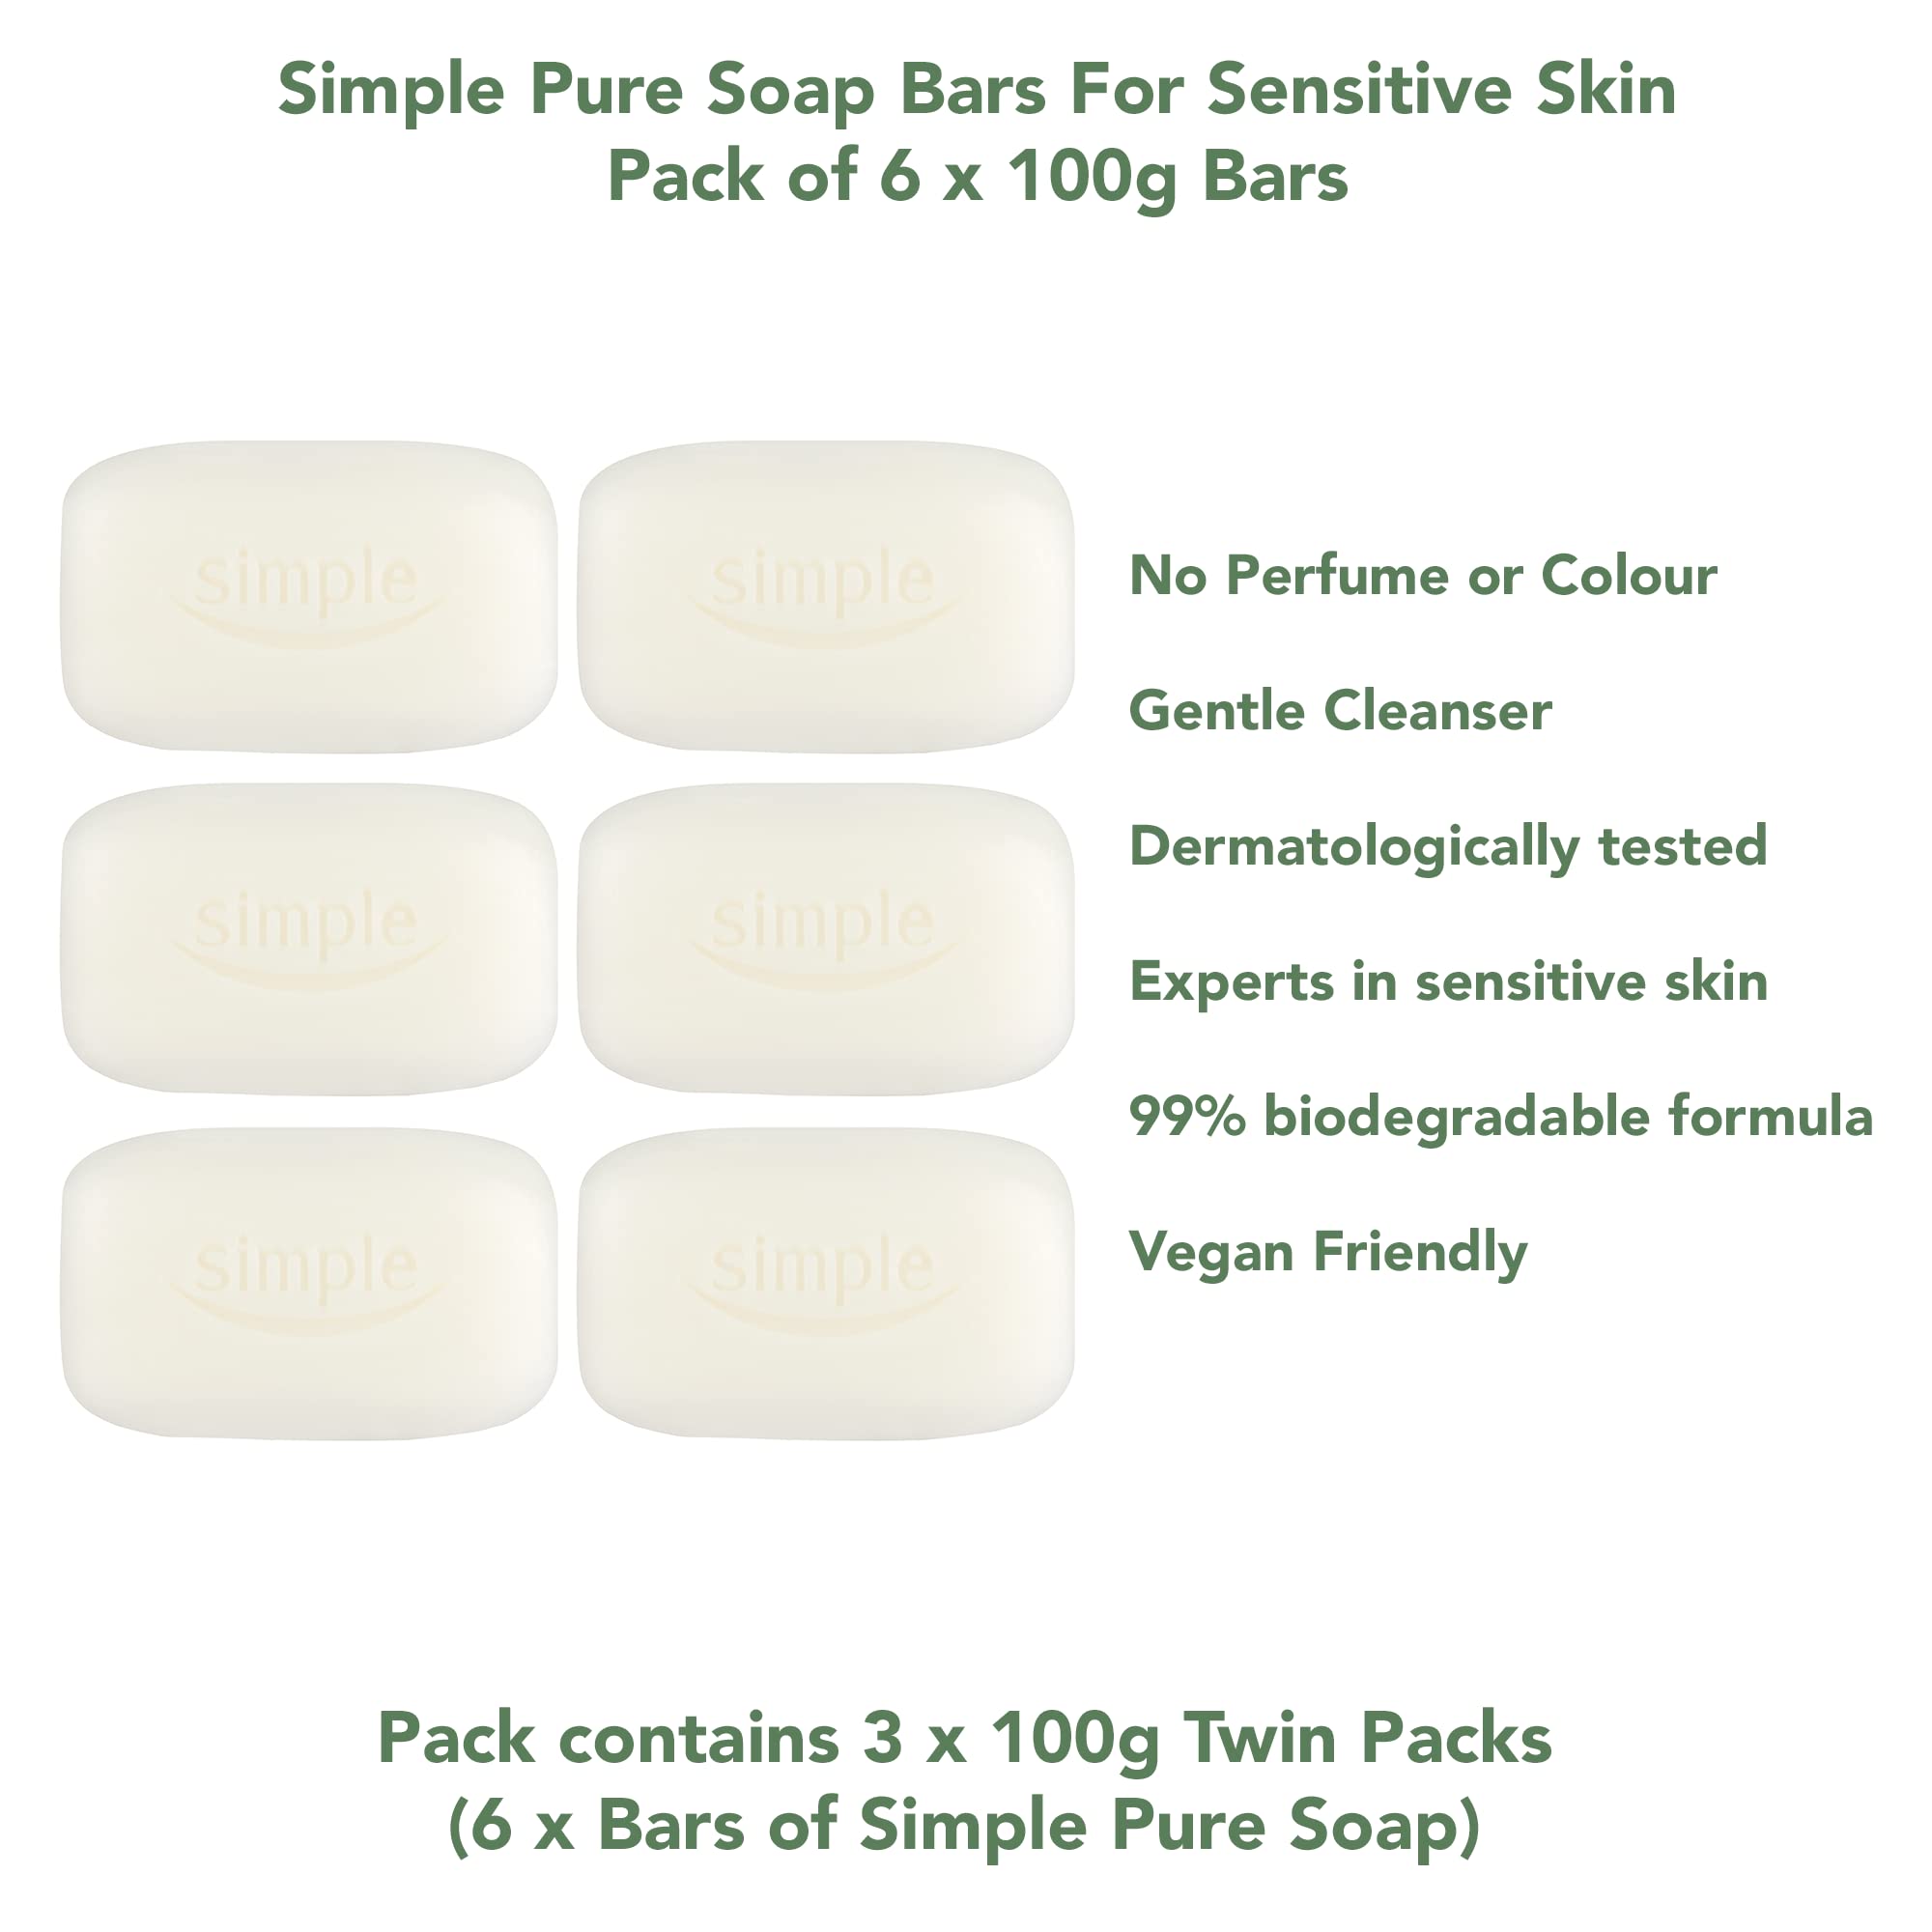 PBW INTERNATIONAL Simple Pure Soap Bars For Sensitive Skin Pack of 6 (6 x 100g) - 3 x Twin Packs